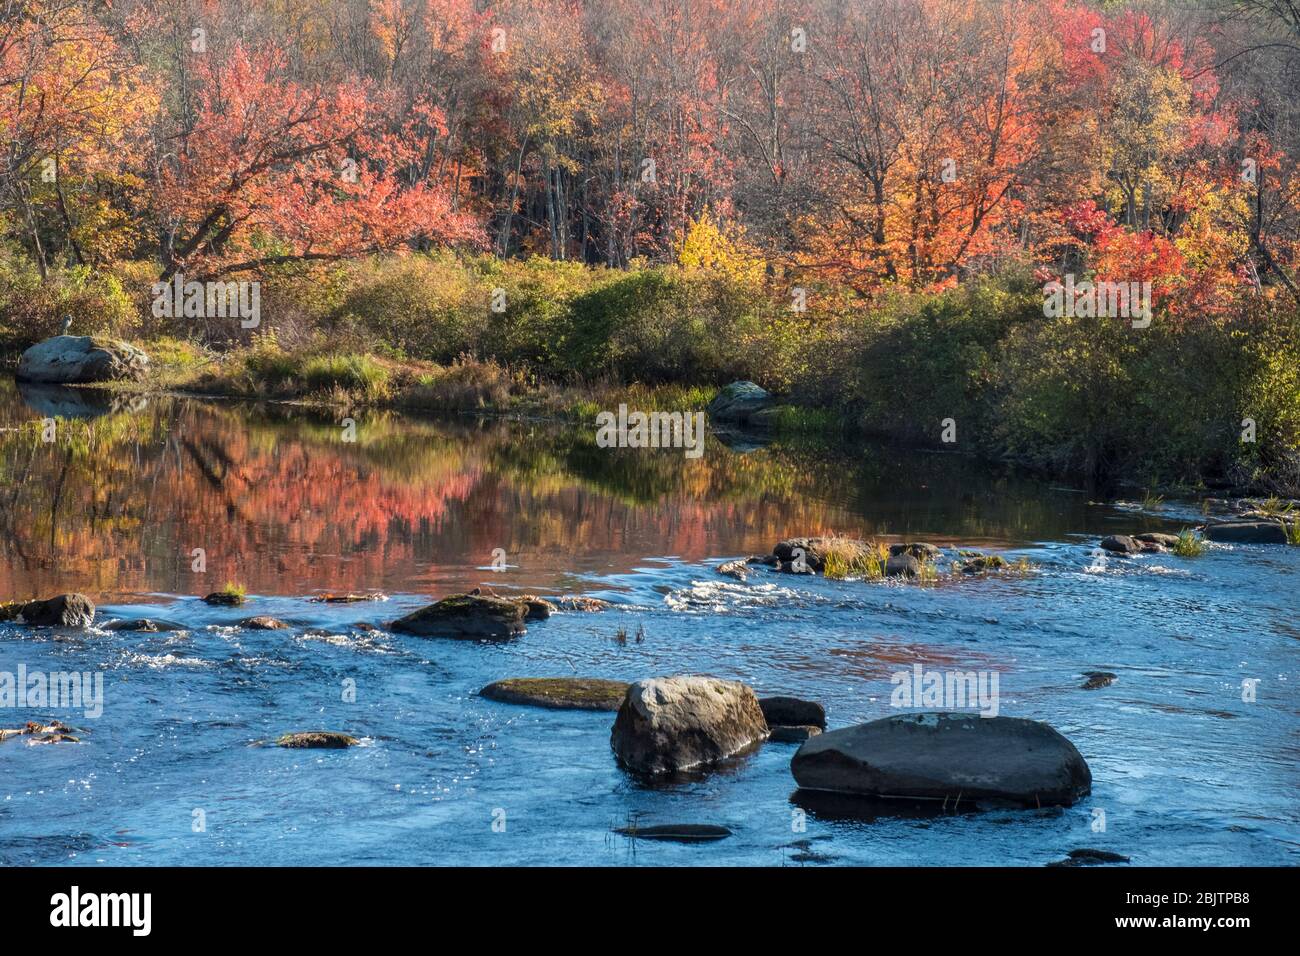 The Millers River at the Birch Hill Dam Reservation, Royalston, MA ...